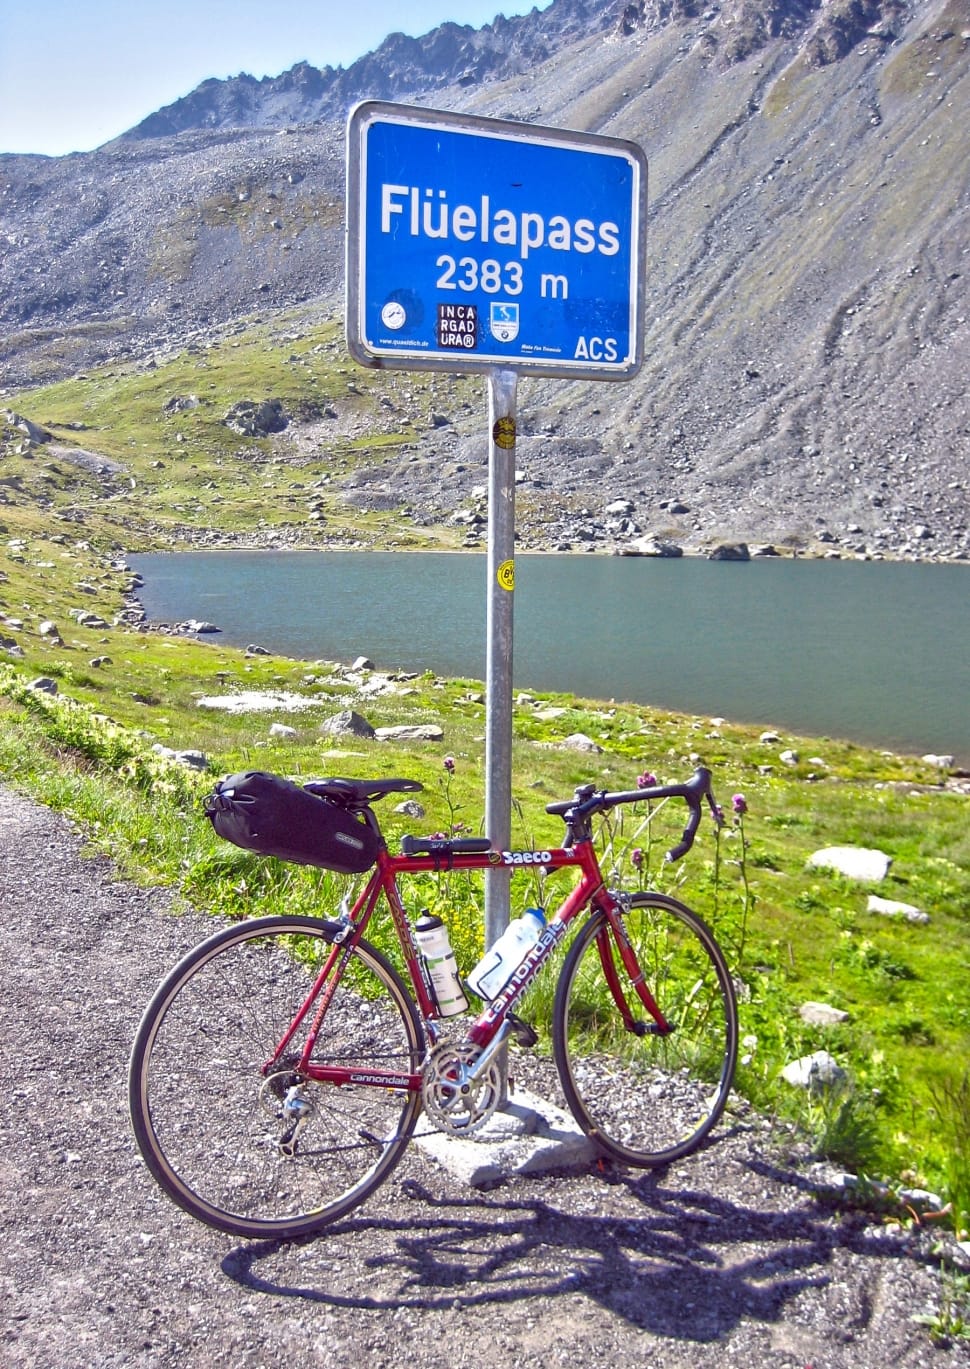 black and red road bike leaning on grey and blue Fluelapass signage near body of water preview